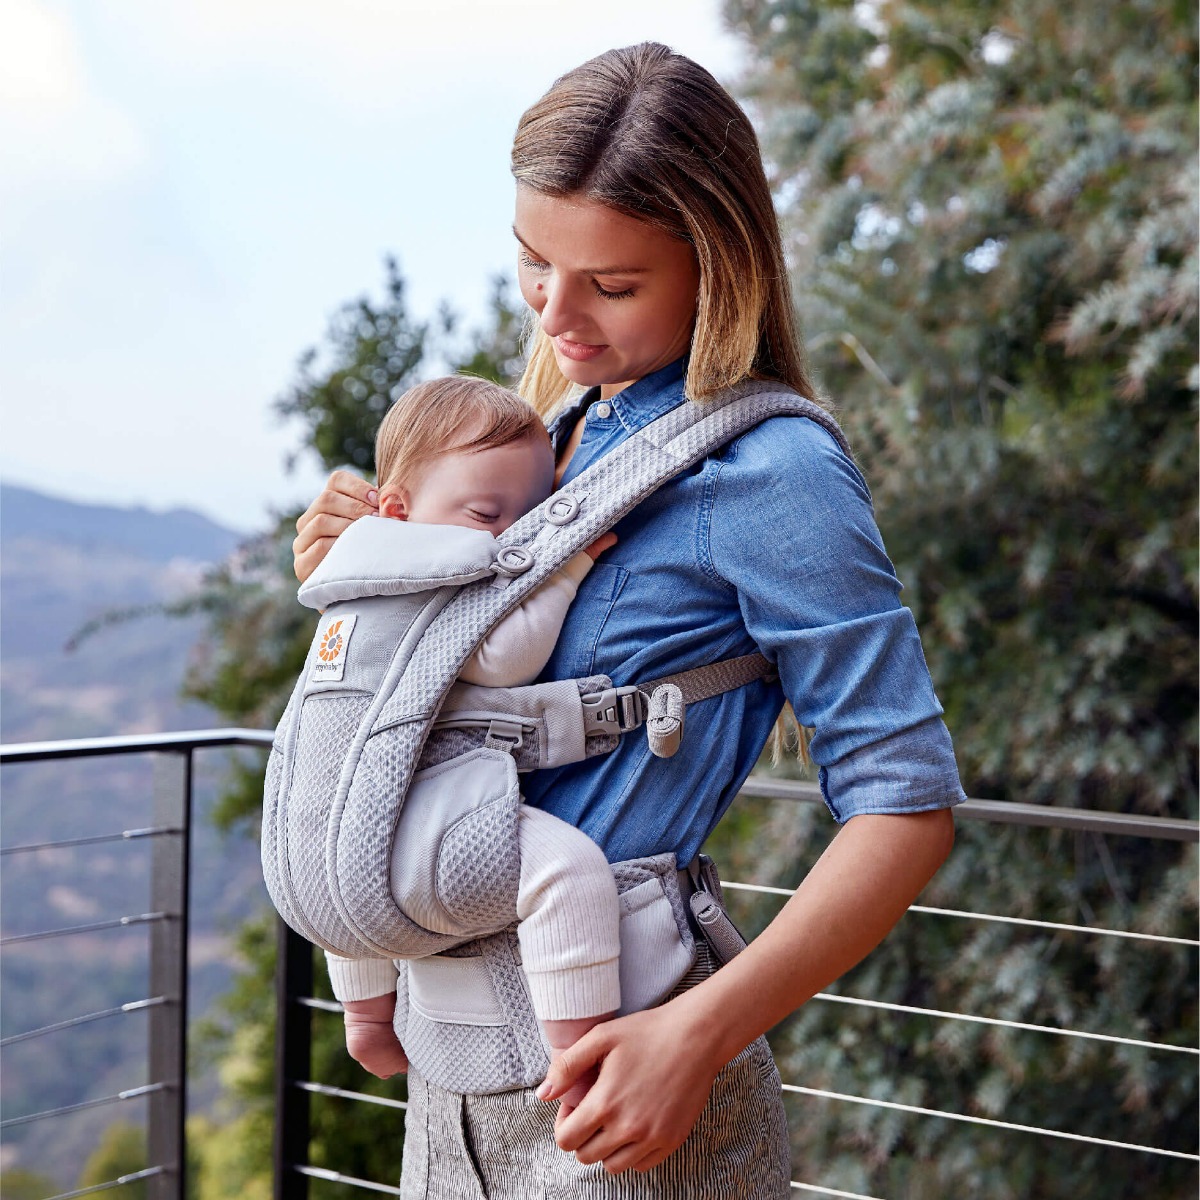 Babywearing in Summer - 8 Top Tips For Staying Safe & Cool. A woman with long dark hair, wearing a blue denim shirt and grey striped trousers, stands on a balcony in front of lush green vegetation on a sunny day, and stares adoringly at her sleeping, blond-haired baby son whom she is carrying on her front in a Grey Ergobaby Omni Breeze Baby Carrier.